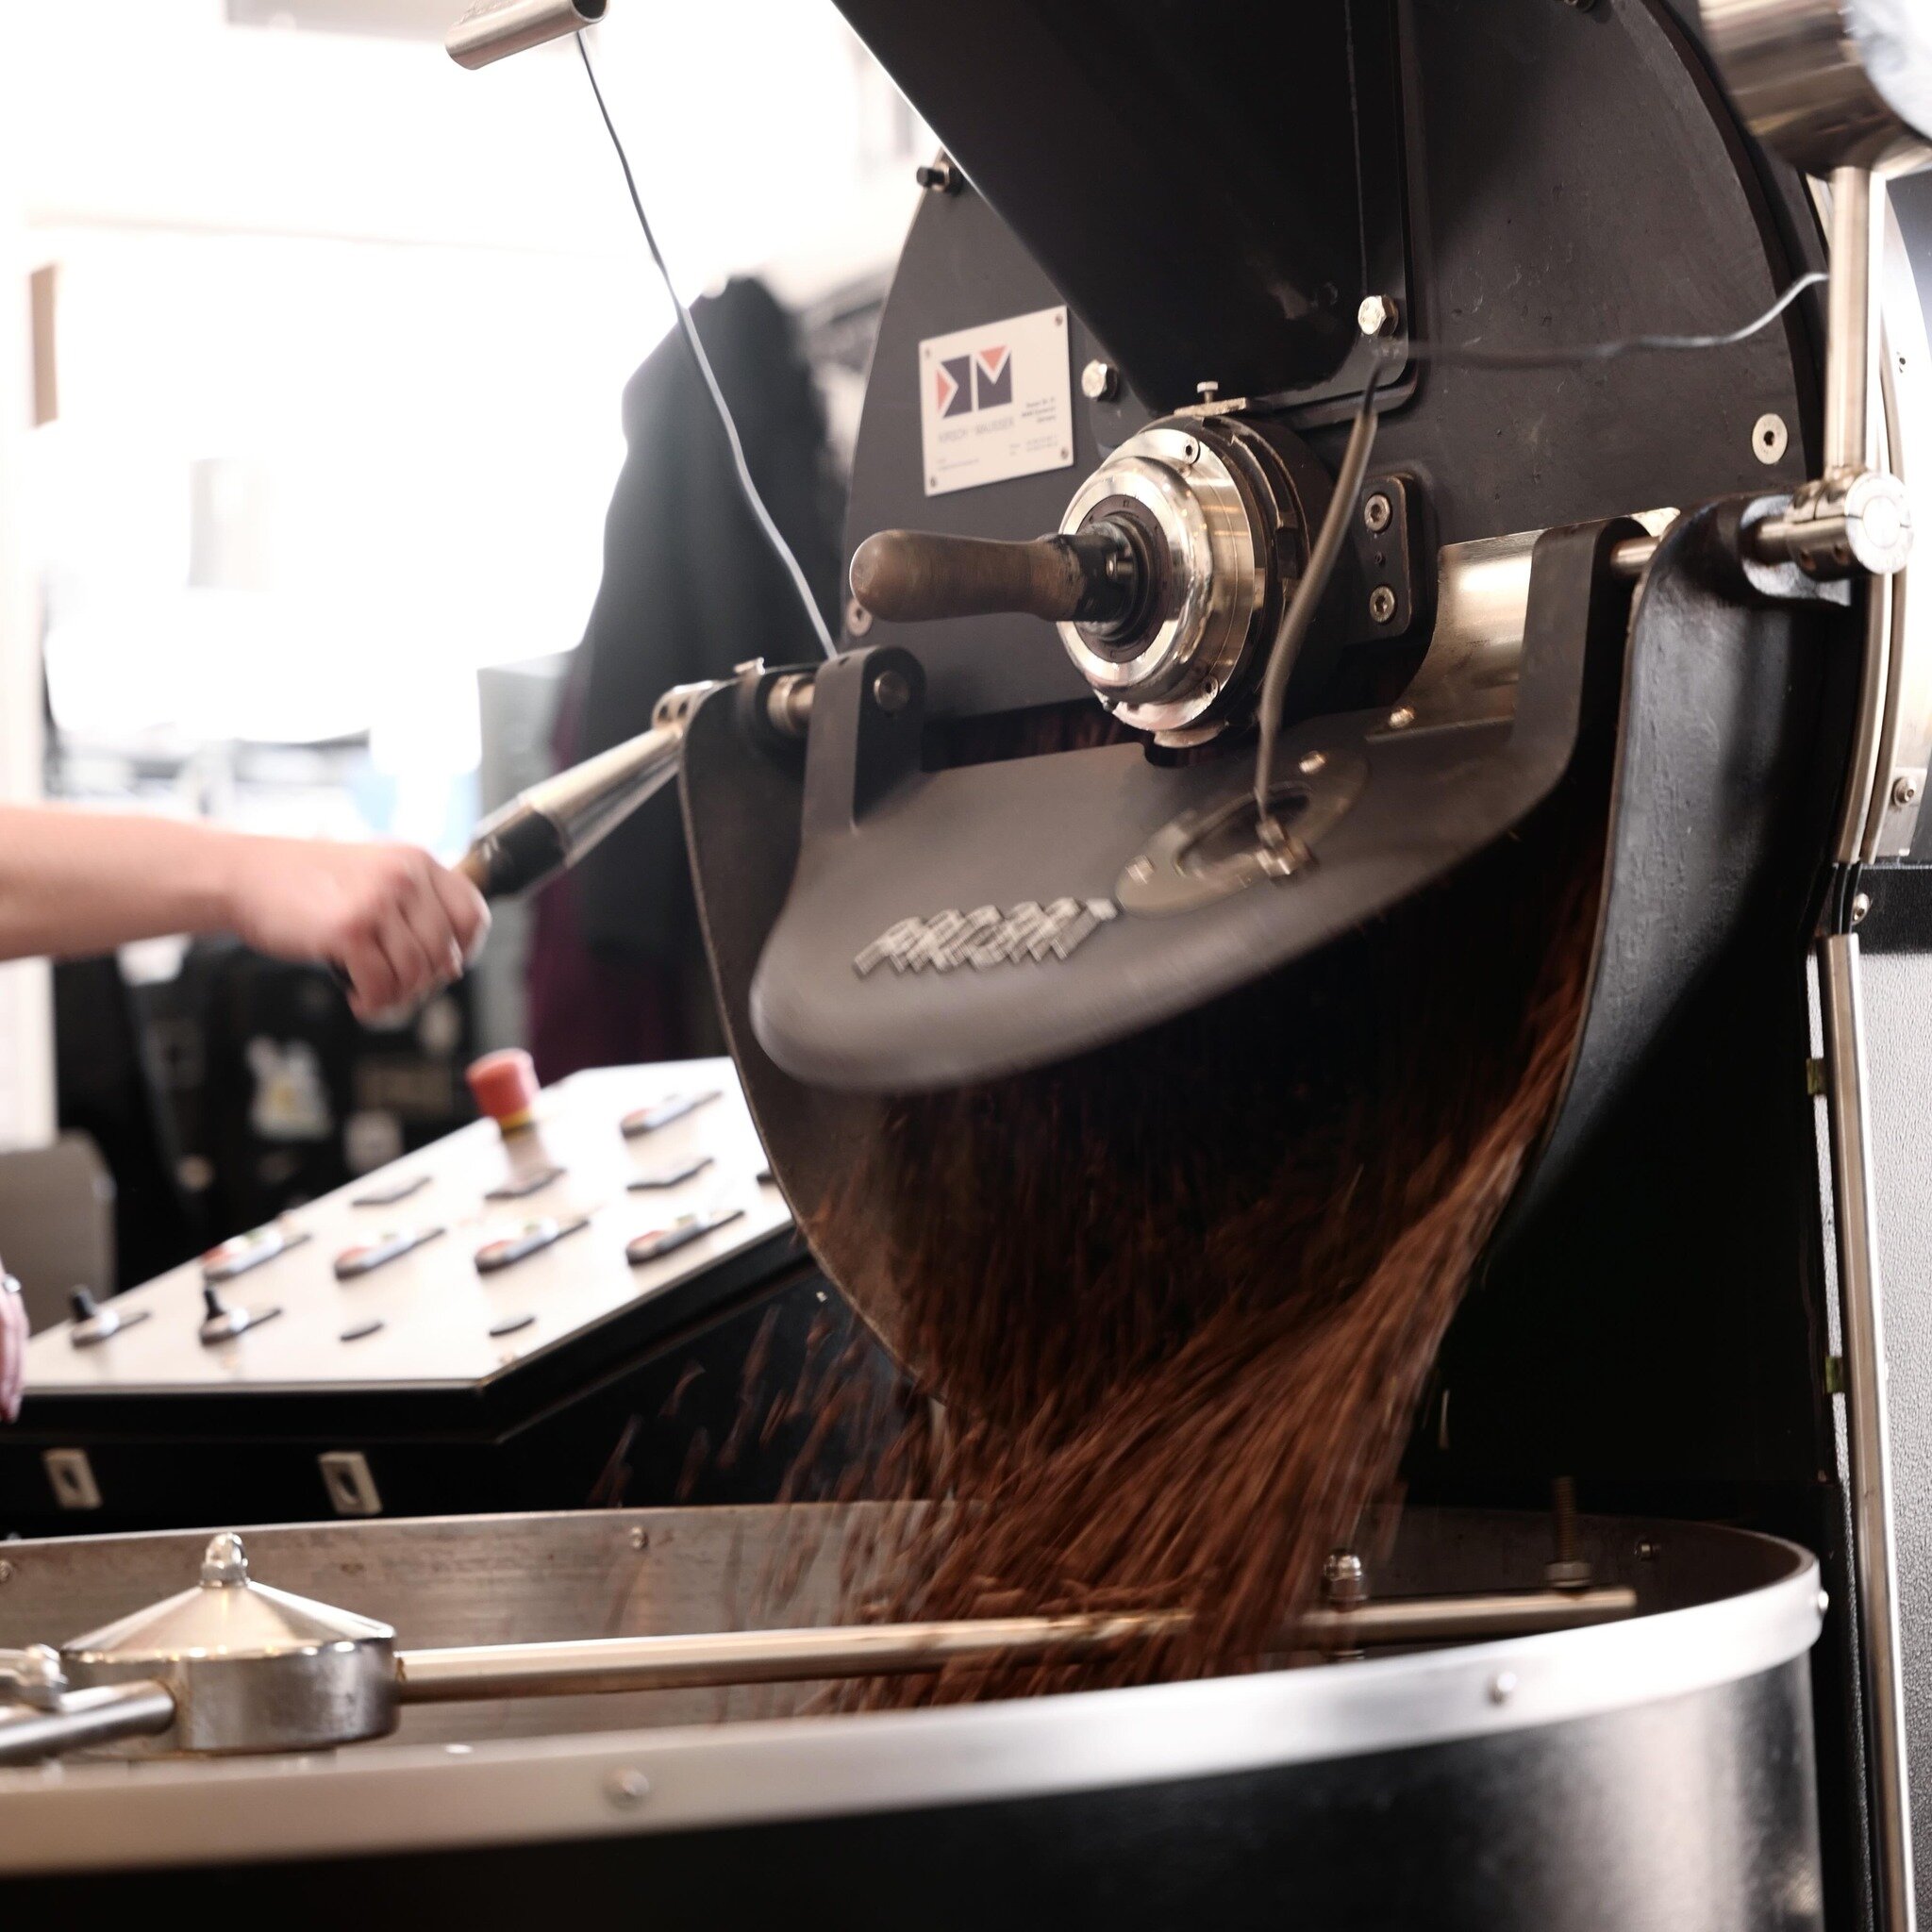 In full production. We love what we do and it shows in the coffee. Come enjoy a coffee at one of our locations or order beans in the link 👆. 3 bags or more = delivery on us. ☕️ 
.
.
.
.
#cogcoffee #specialtycoffee #coffee #dtlacoffee #coffeeshop #cu